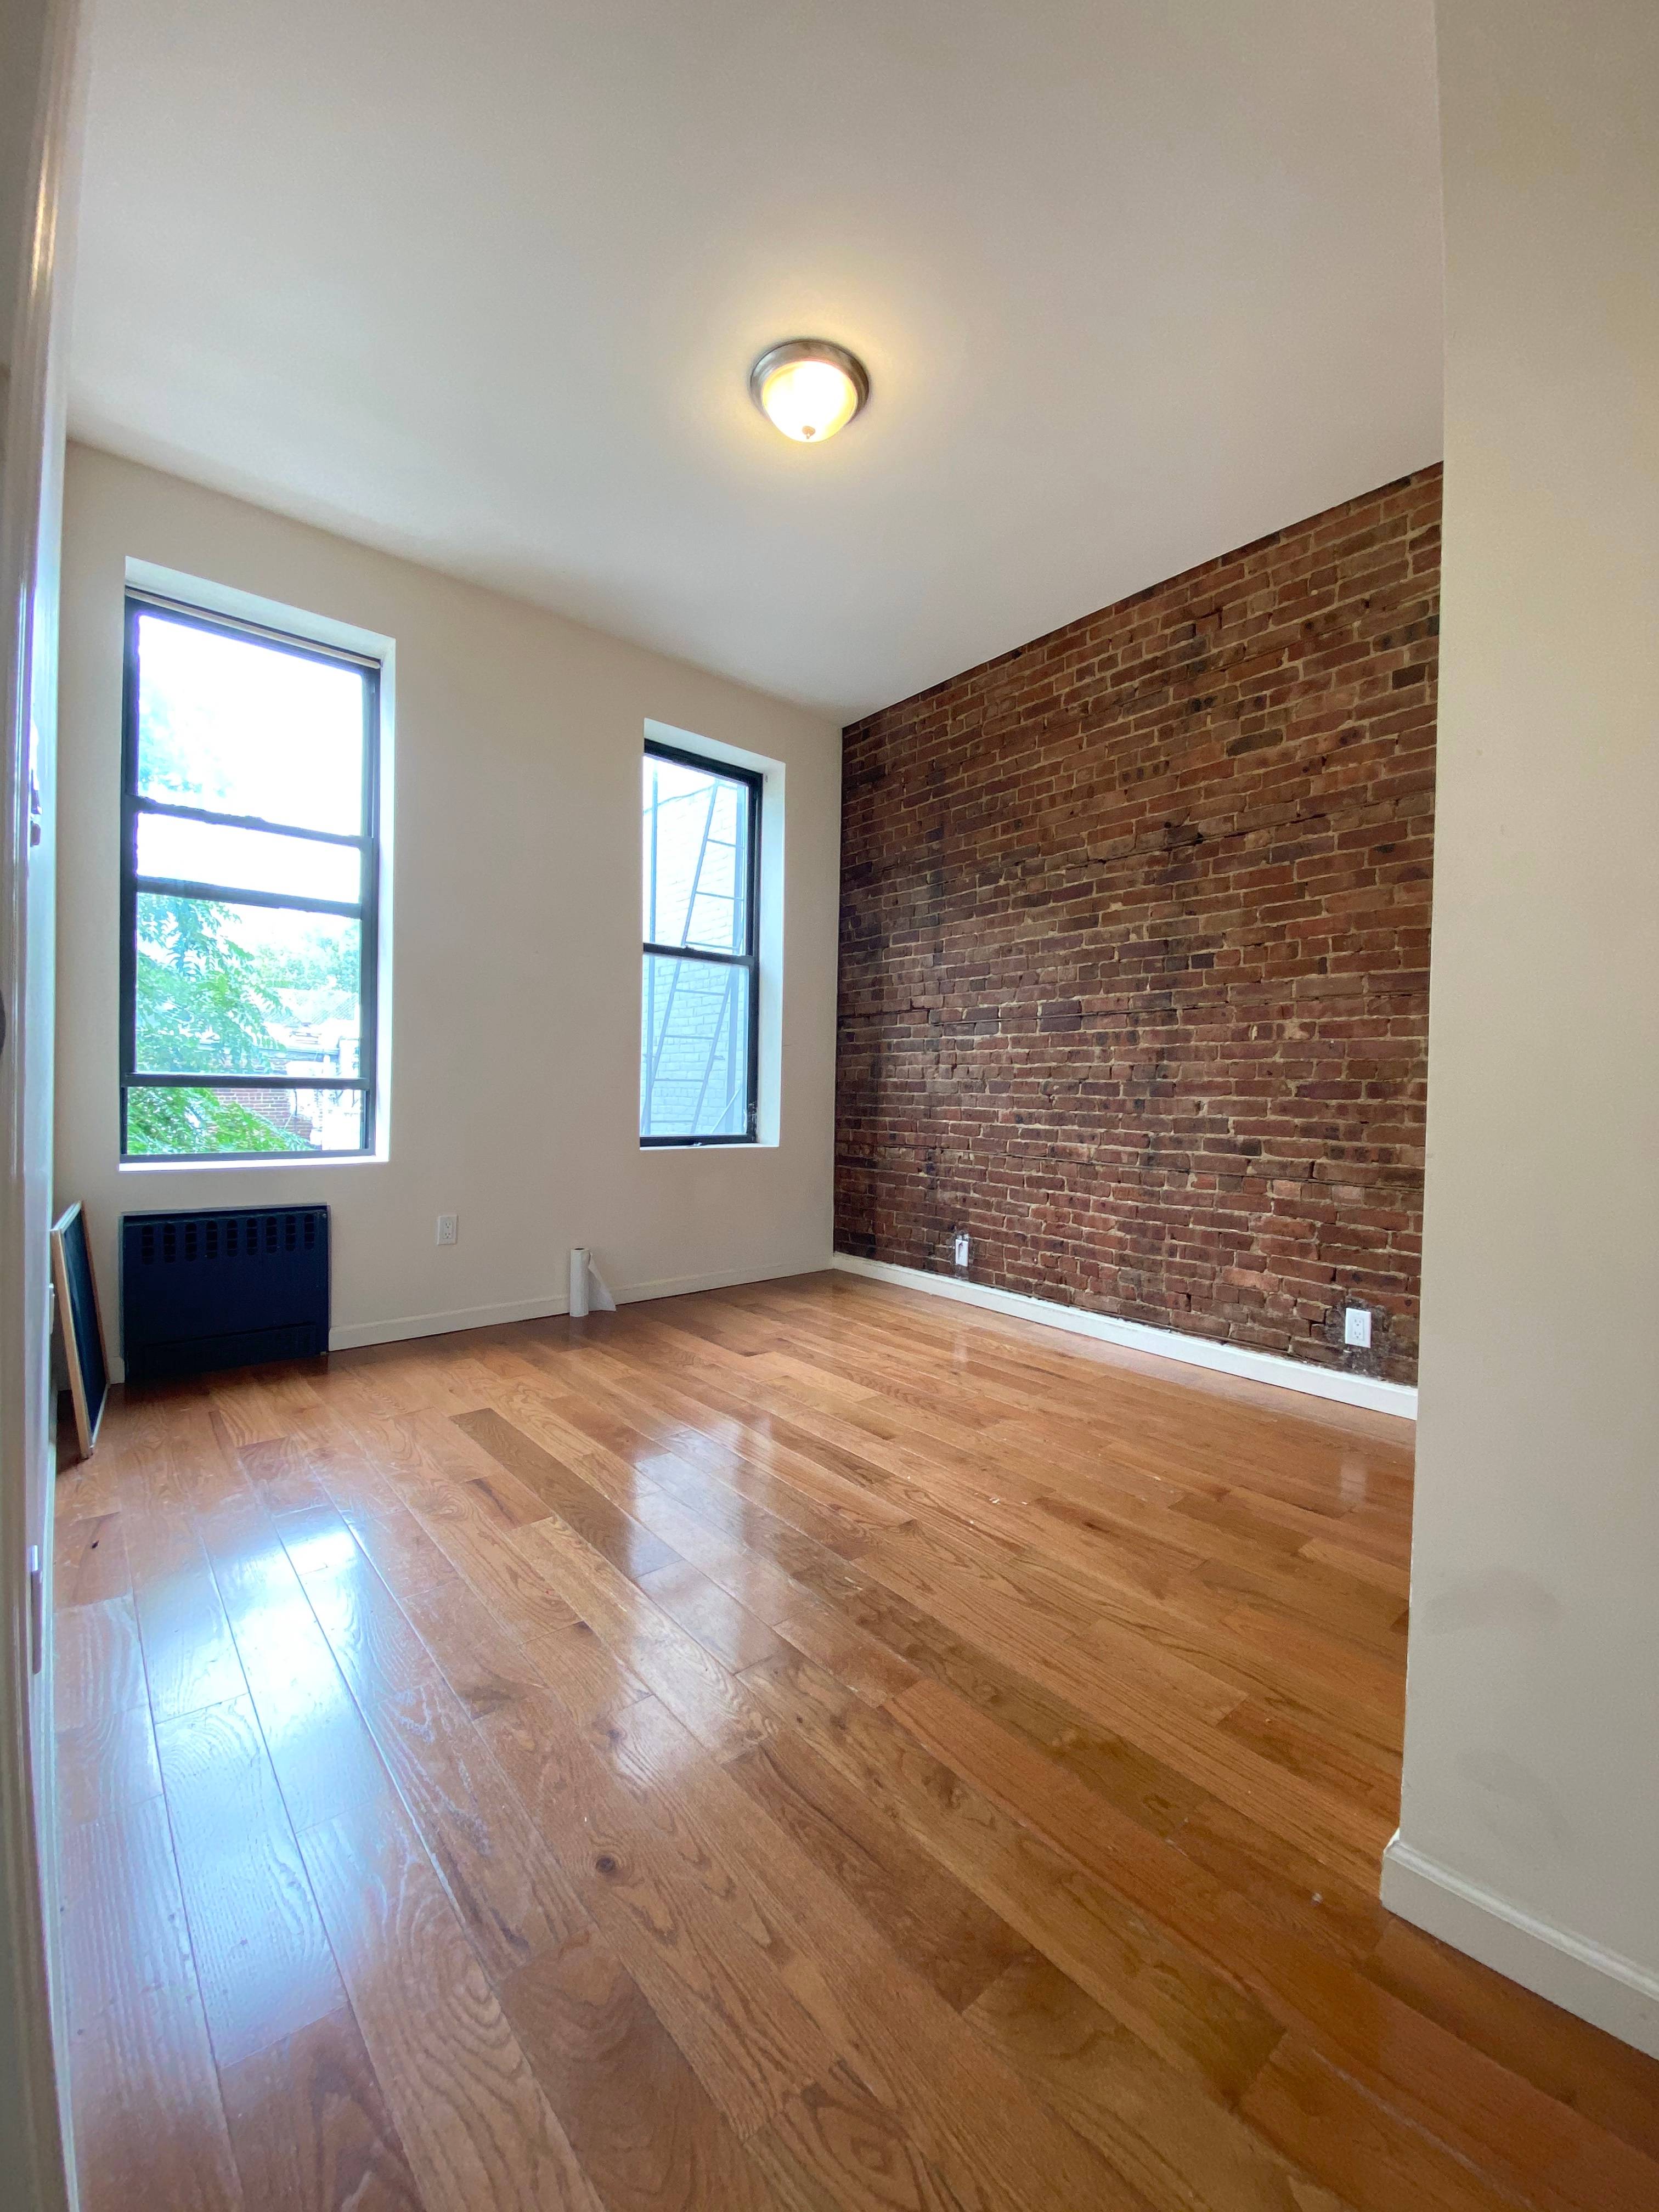 Available for July 1st this sunny and large three bedroom in Williamsburg is centrally located to all the neighborhood offerings.